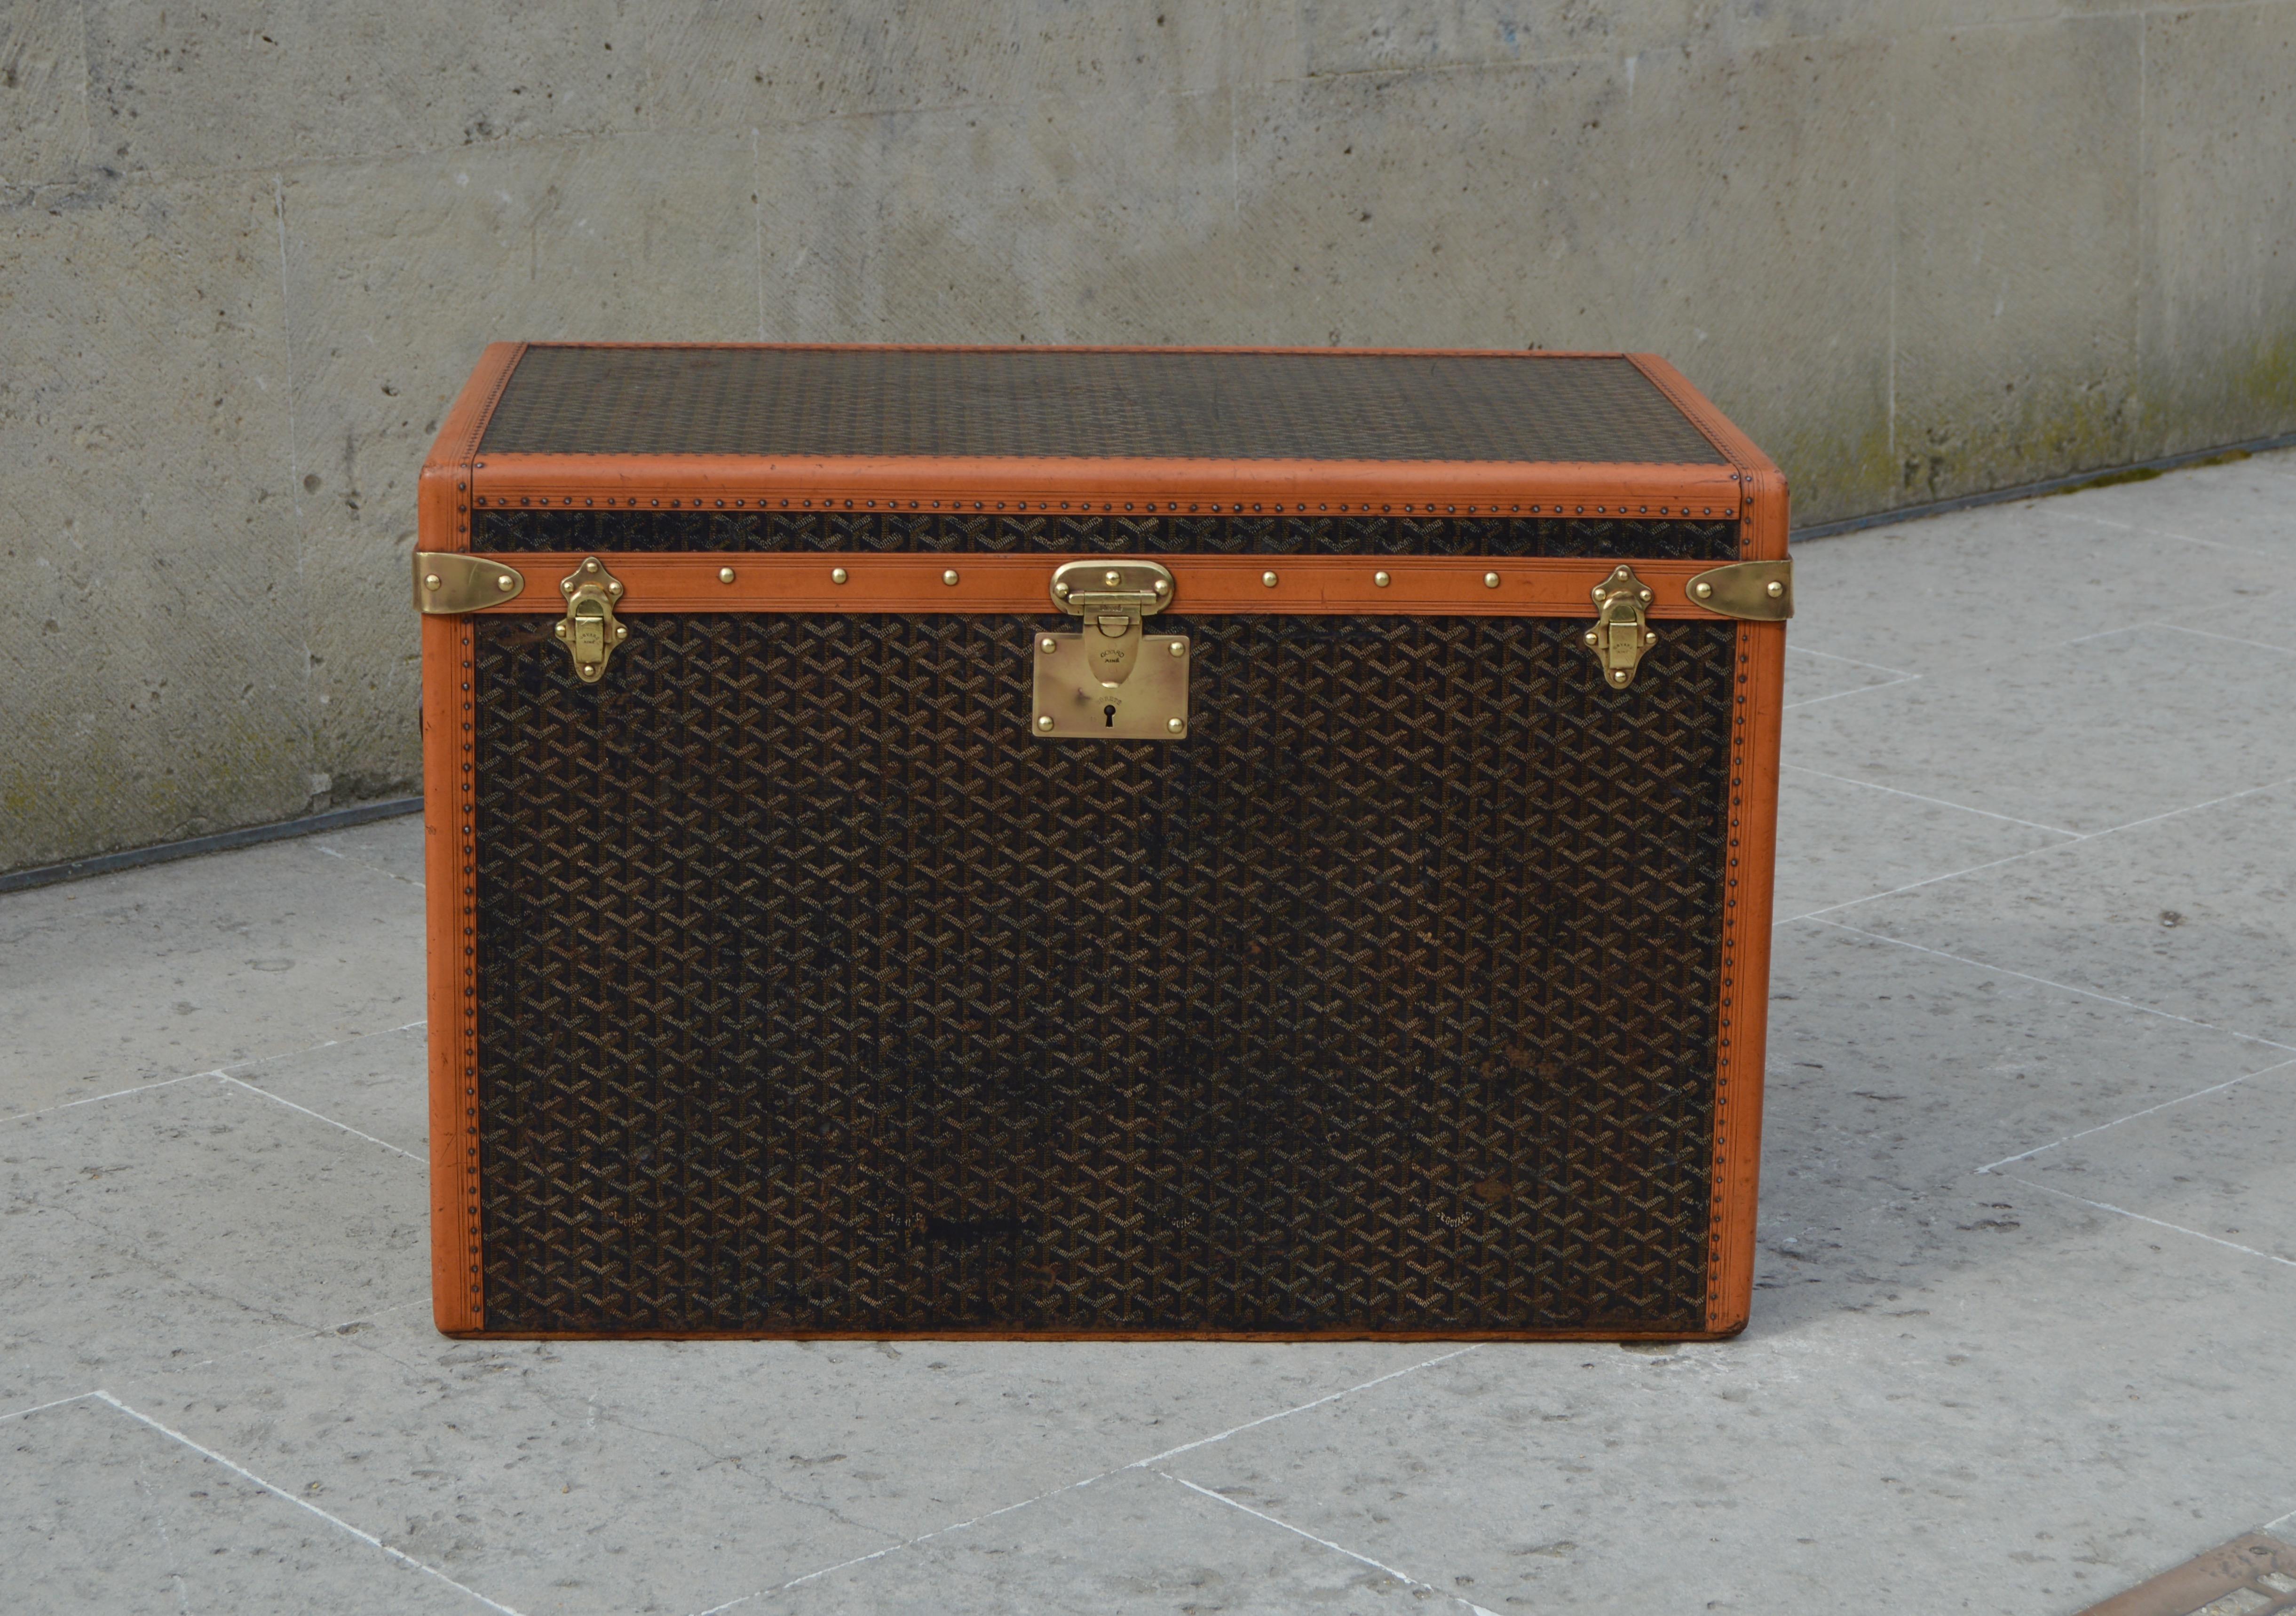 Superb 1910's Goyard hat trunk in superb condition, protected by leather trims and covered with Goyardine canvas. The trunk is equipped with brass parts stamped Goyard Paris, with 2 leather handles restored to the original ones. The original owner's